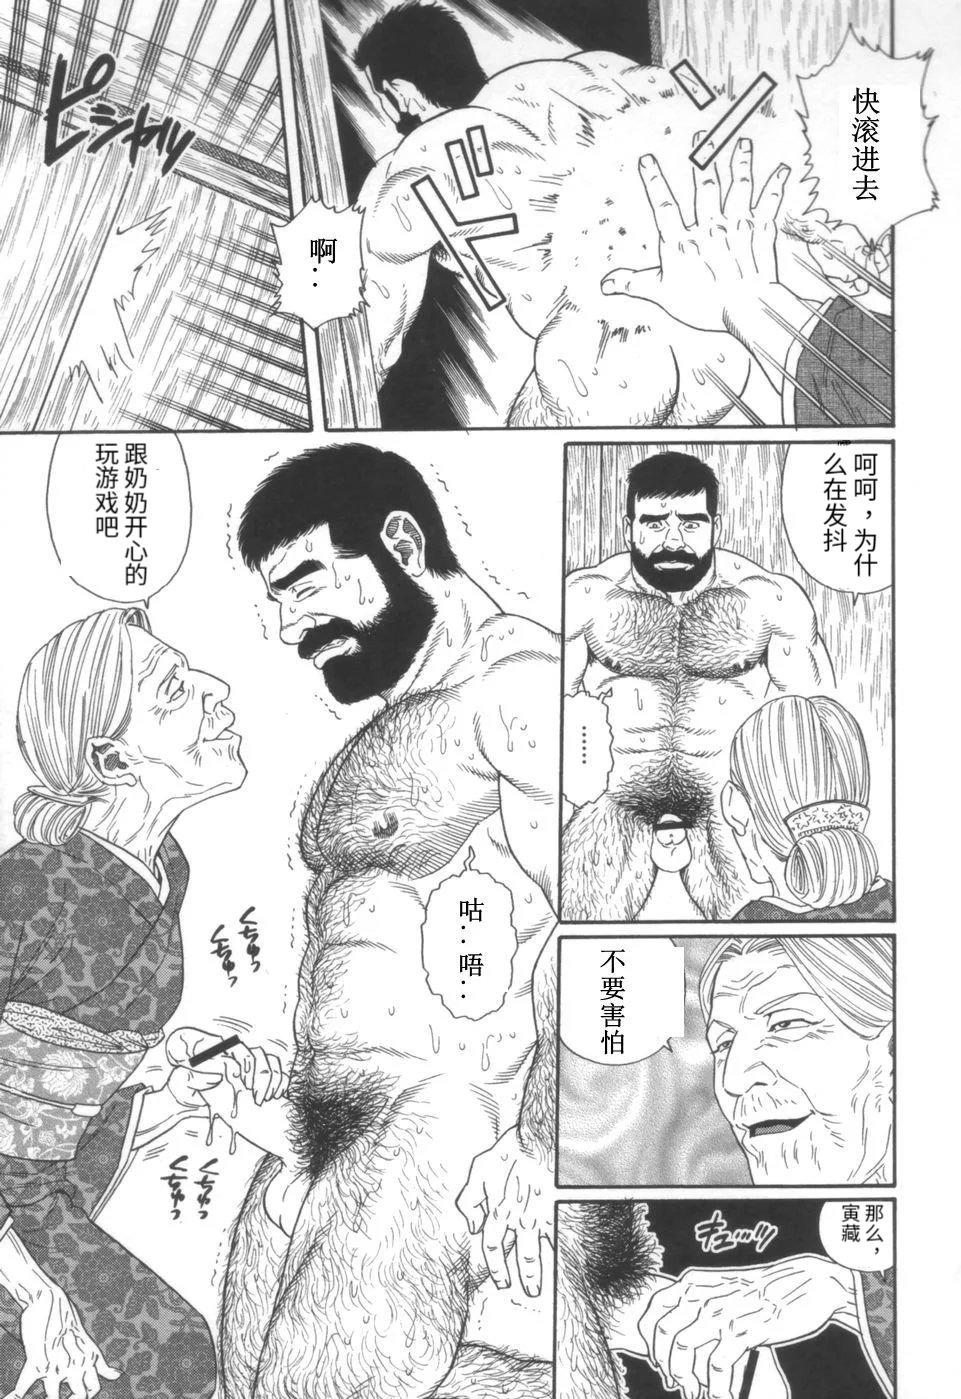 Shot Gedou no Ie Joukan | 邪道之家 Vol. 1 Ch.4 Making Love Porn - Page 3